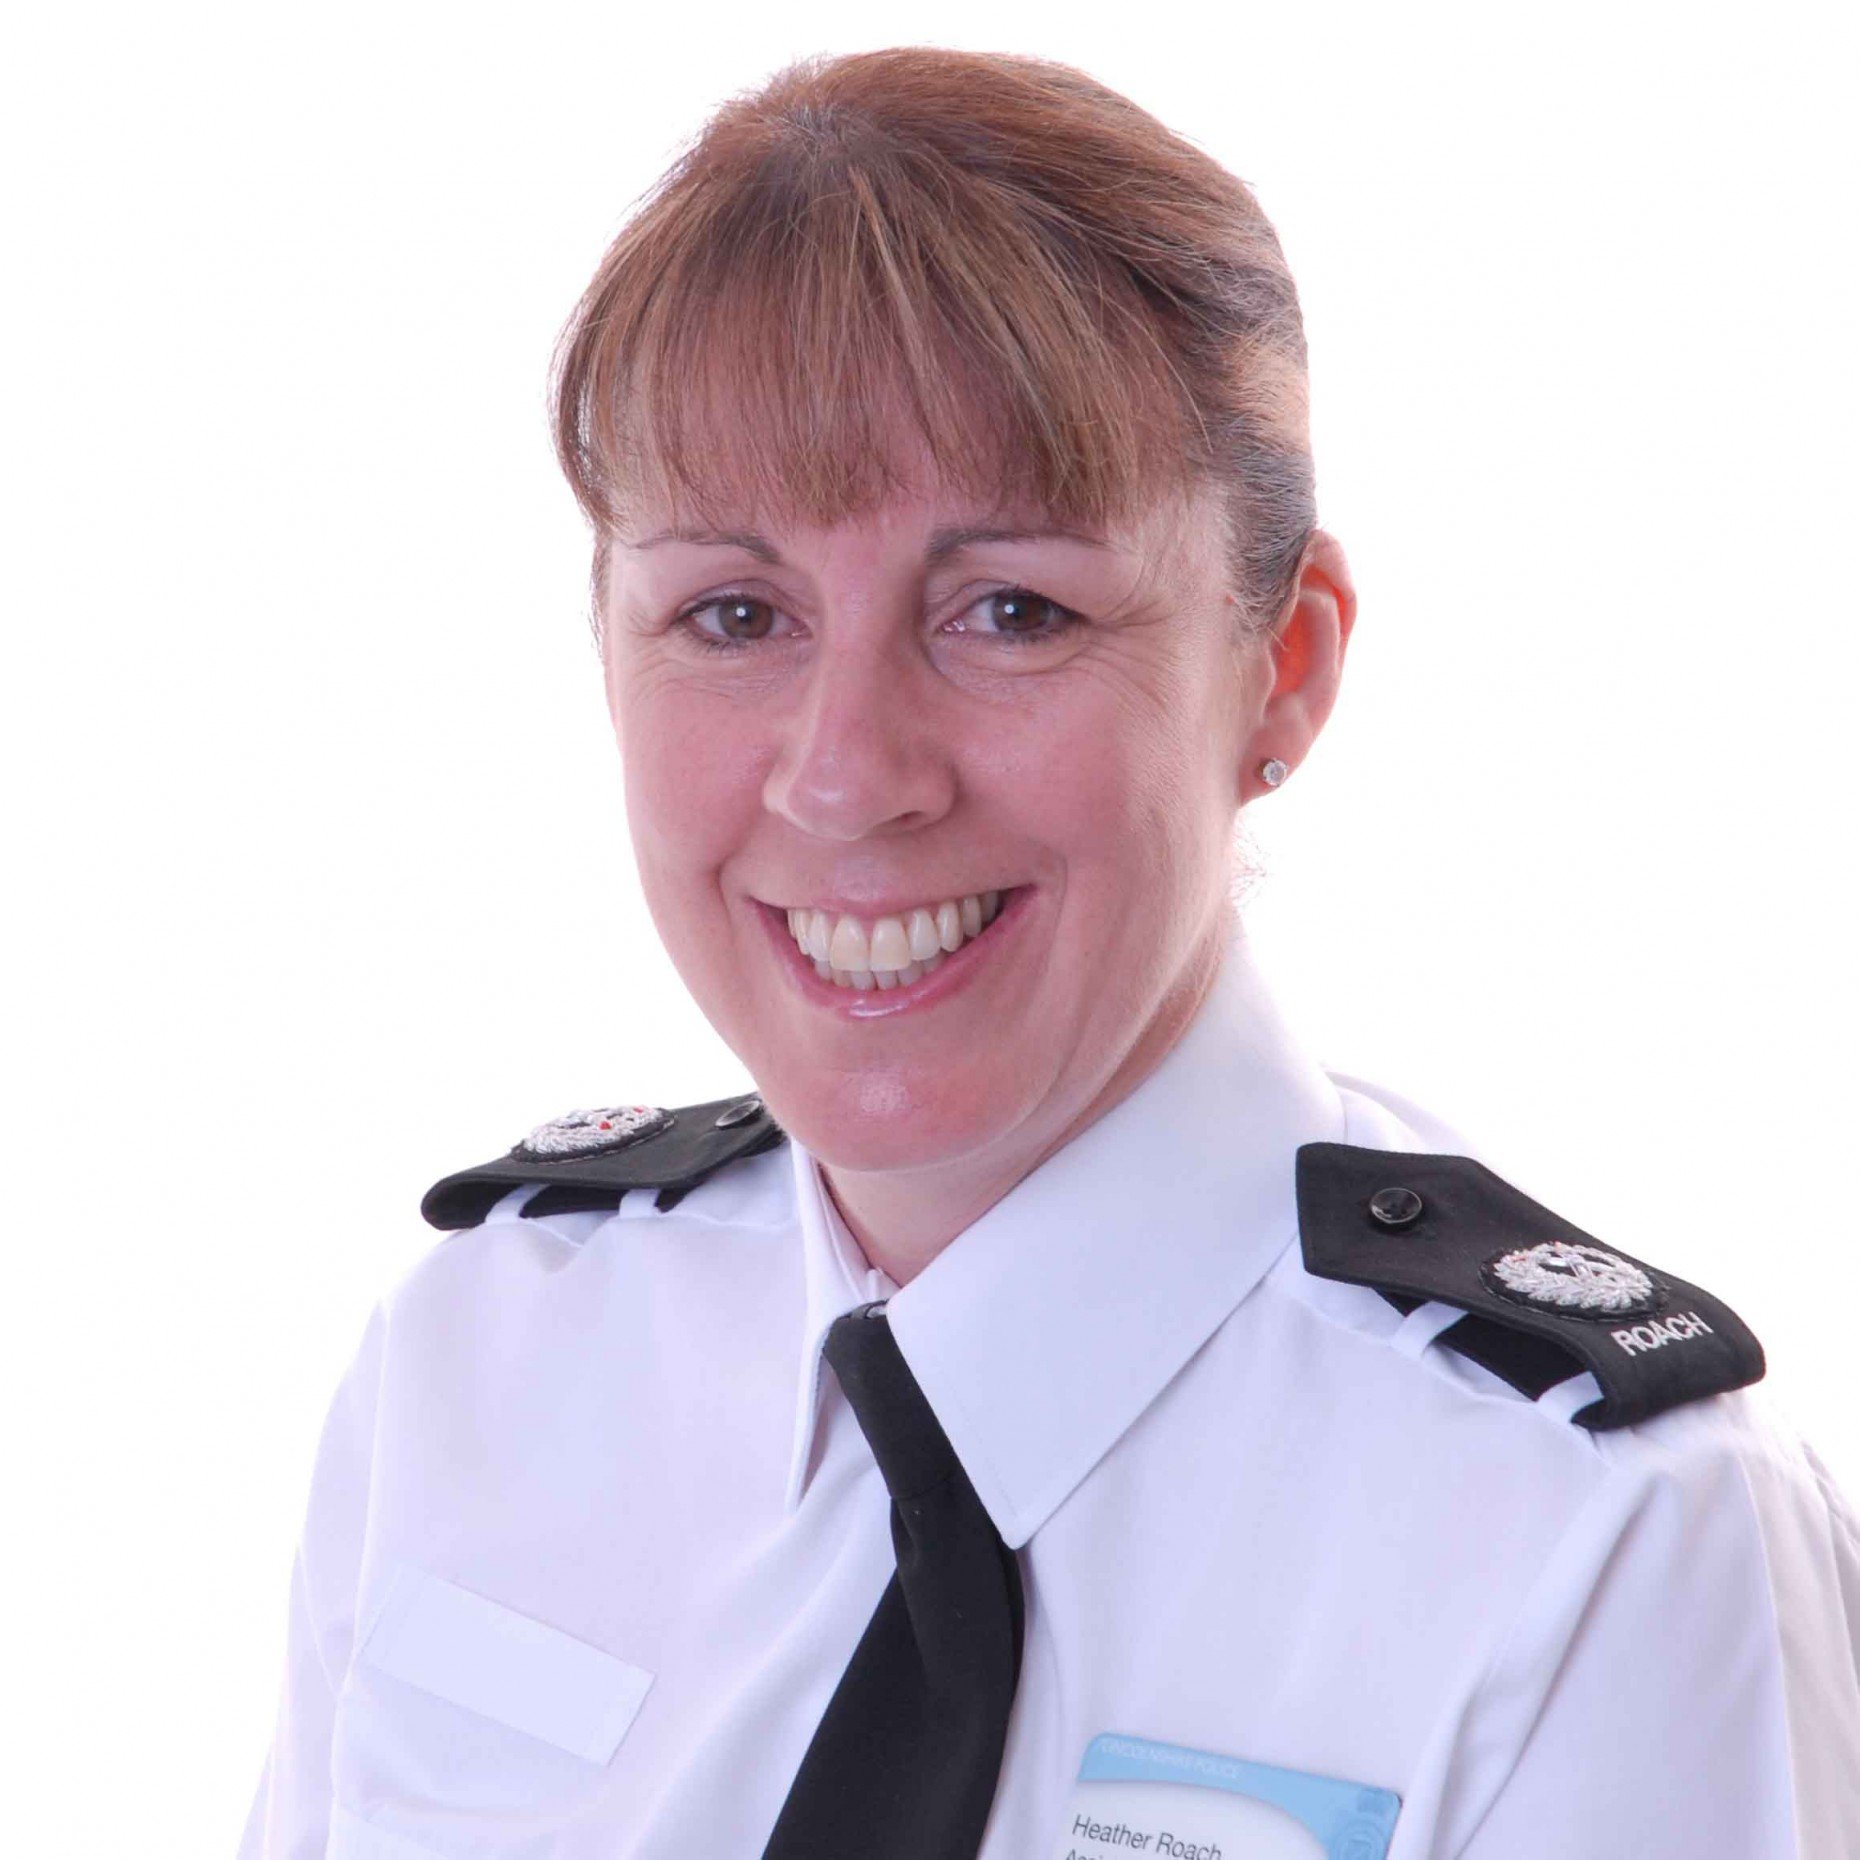 Lincolnshire Police Assistant Chief Constable Heather Roach